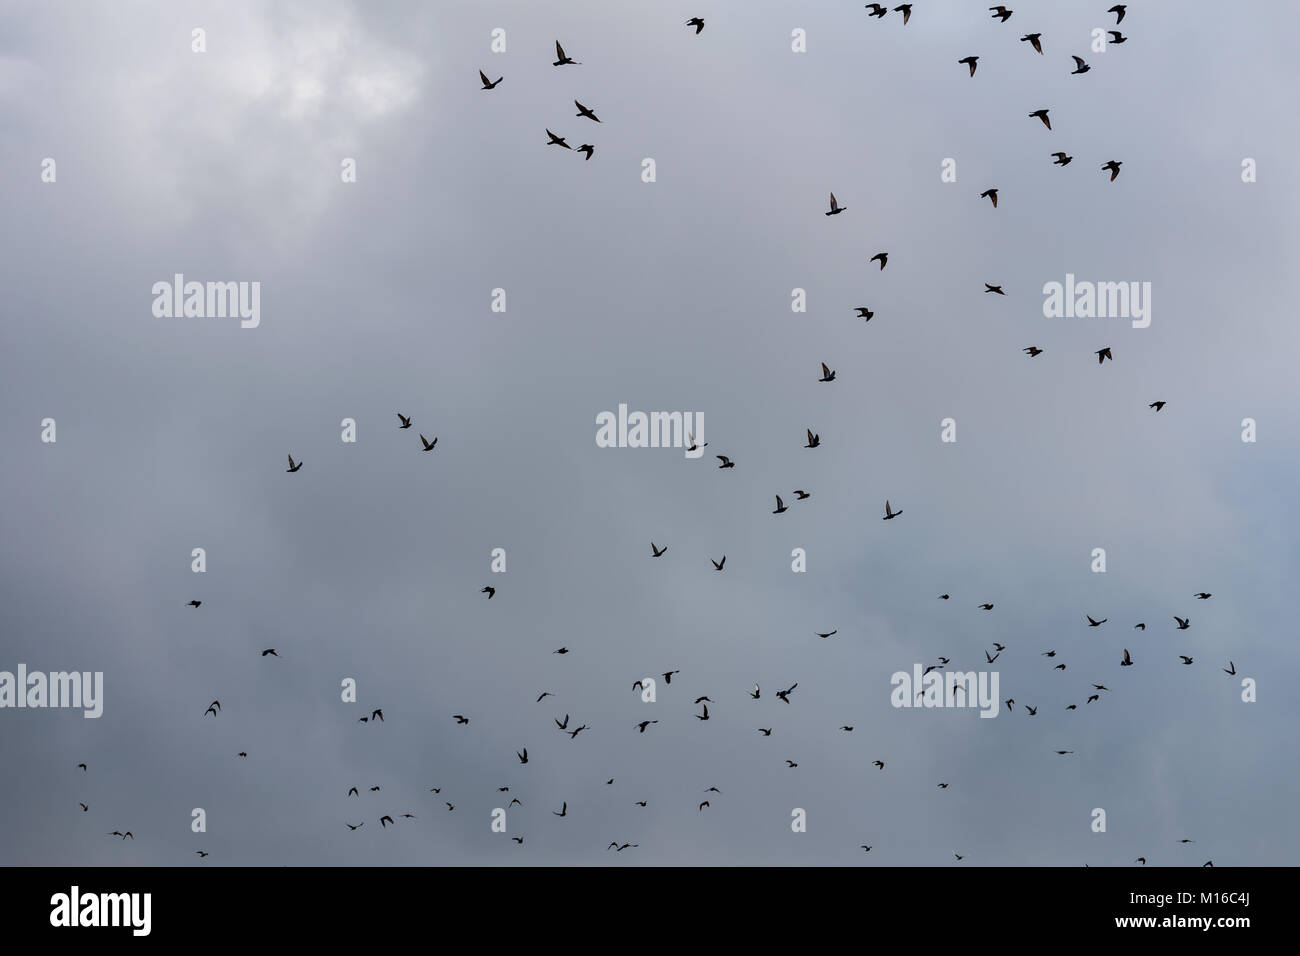 Flying birds on the sky. Black silhouettes and shapes against the bright sky. Migration of birds on the fall. Stock Photo